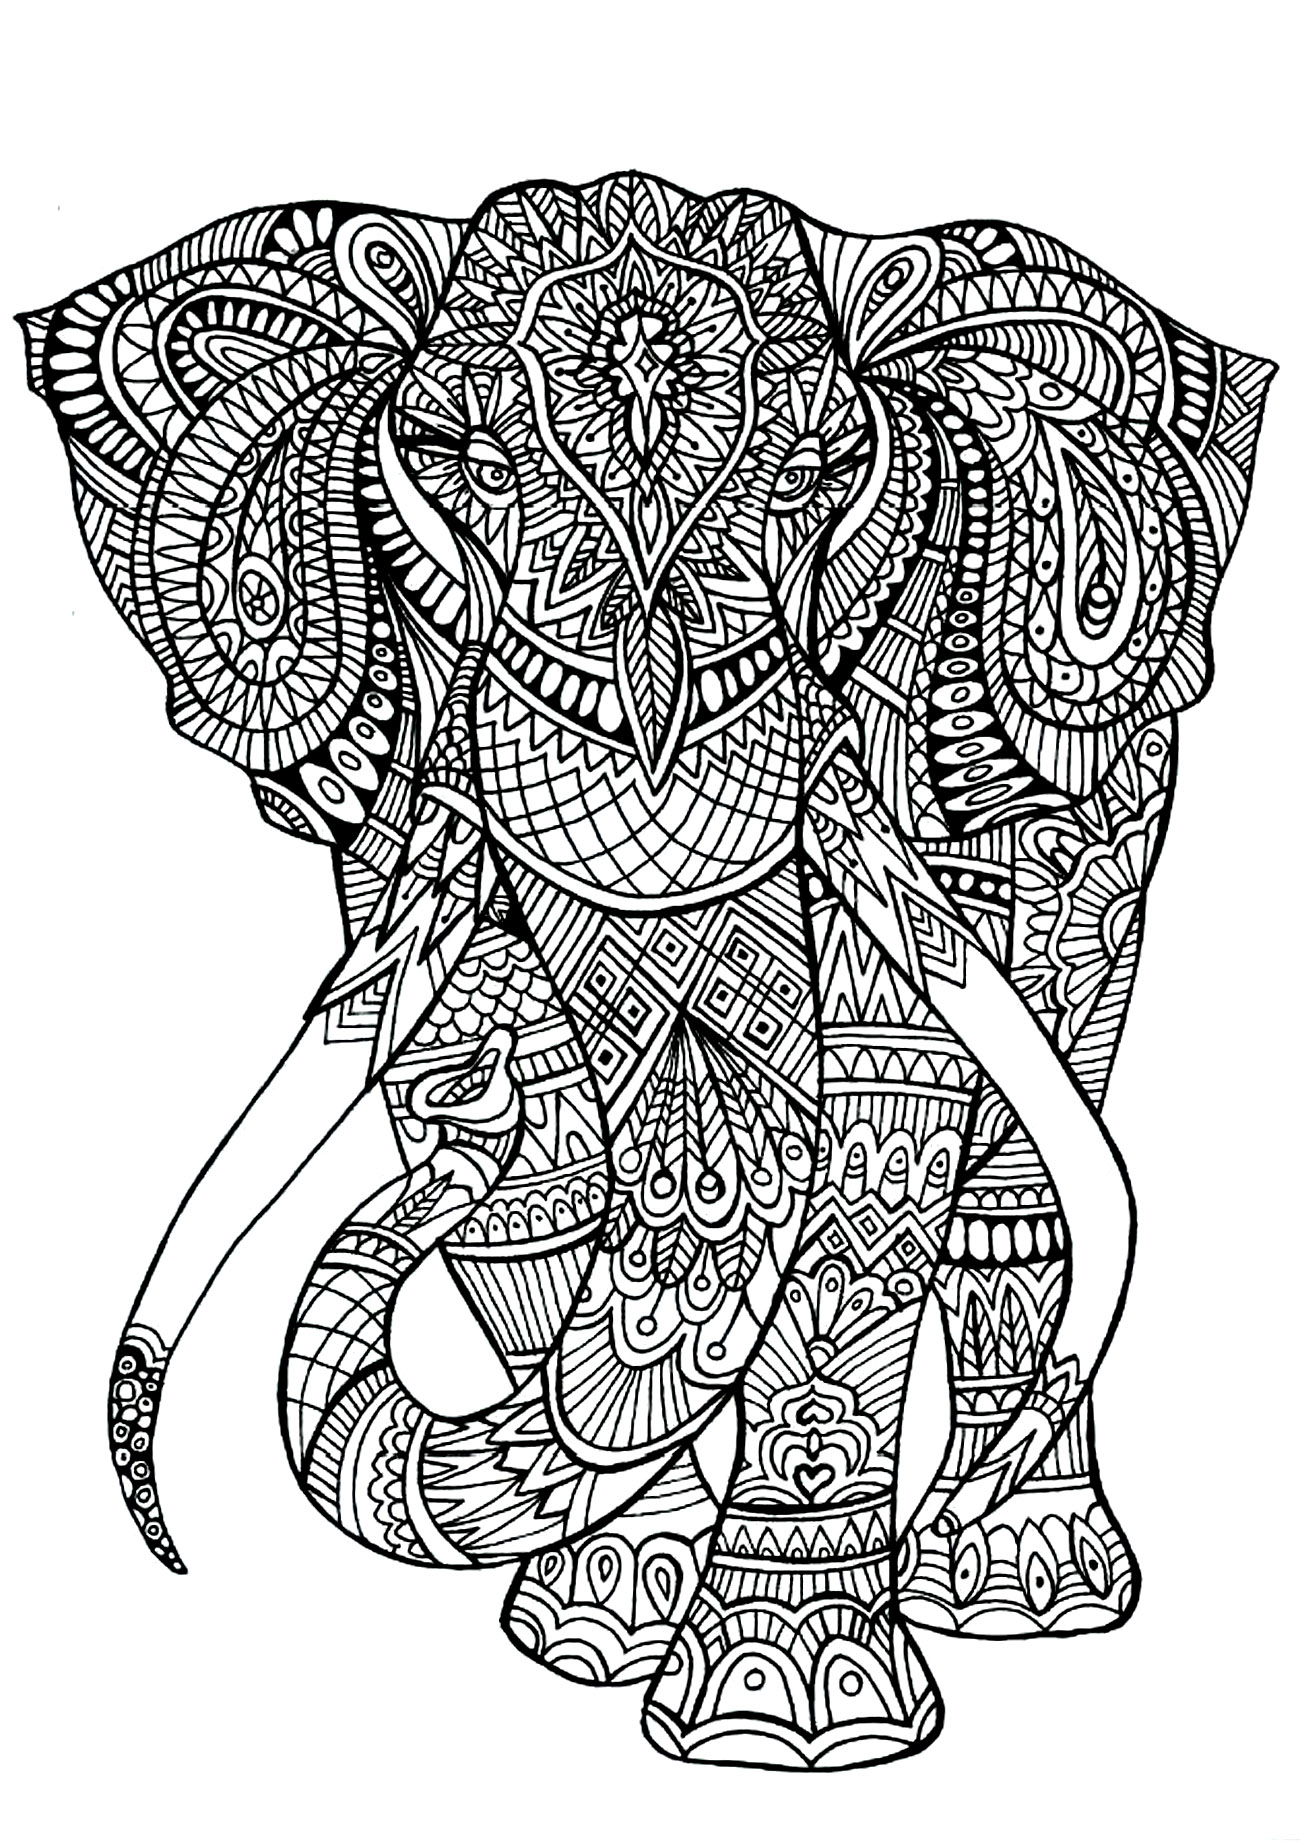 Animals - Coloring pages for adults : coloring-adult-elephant-patterns